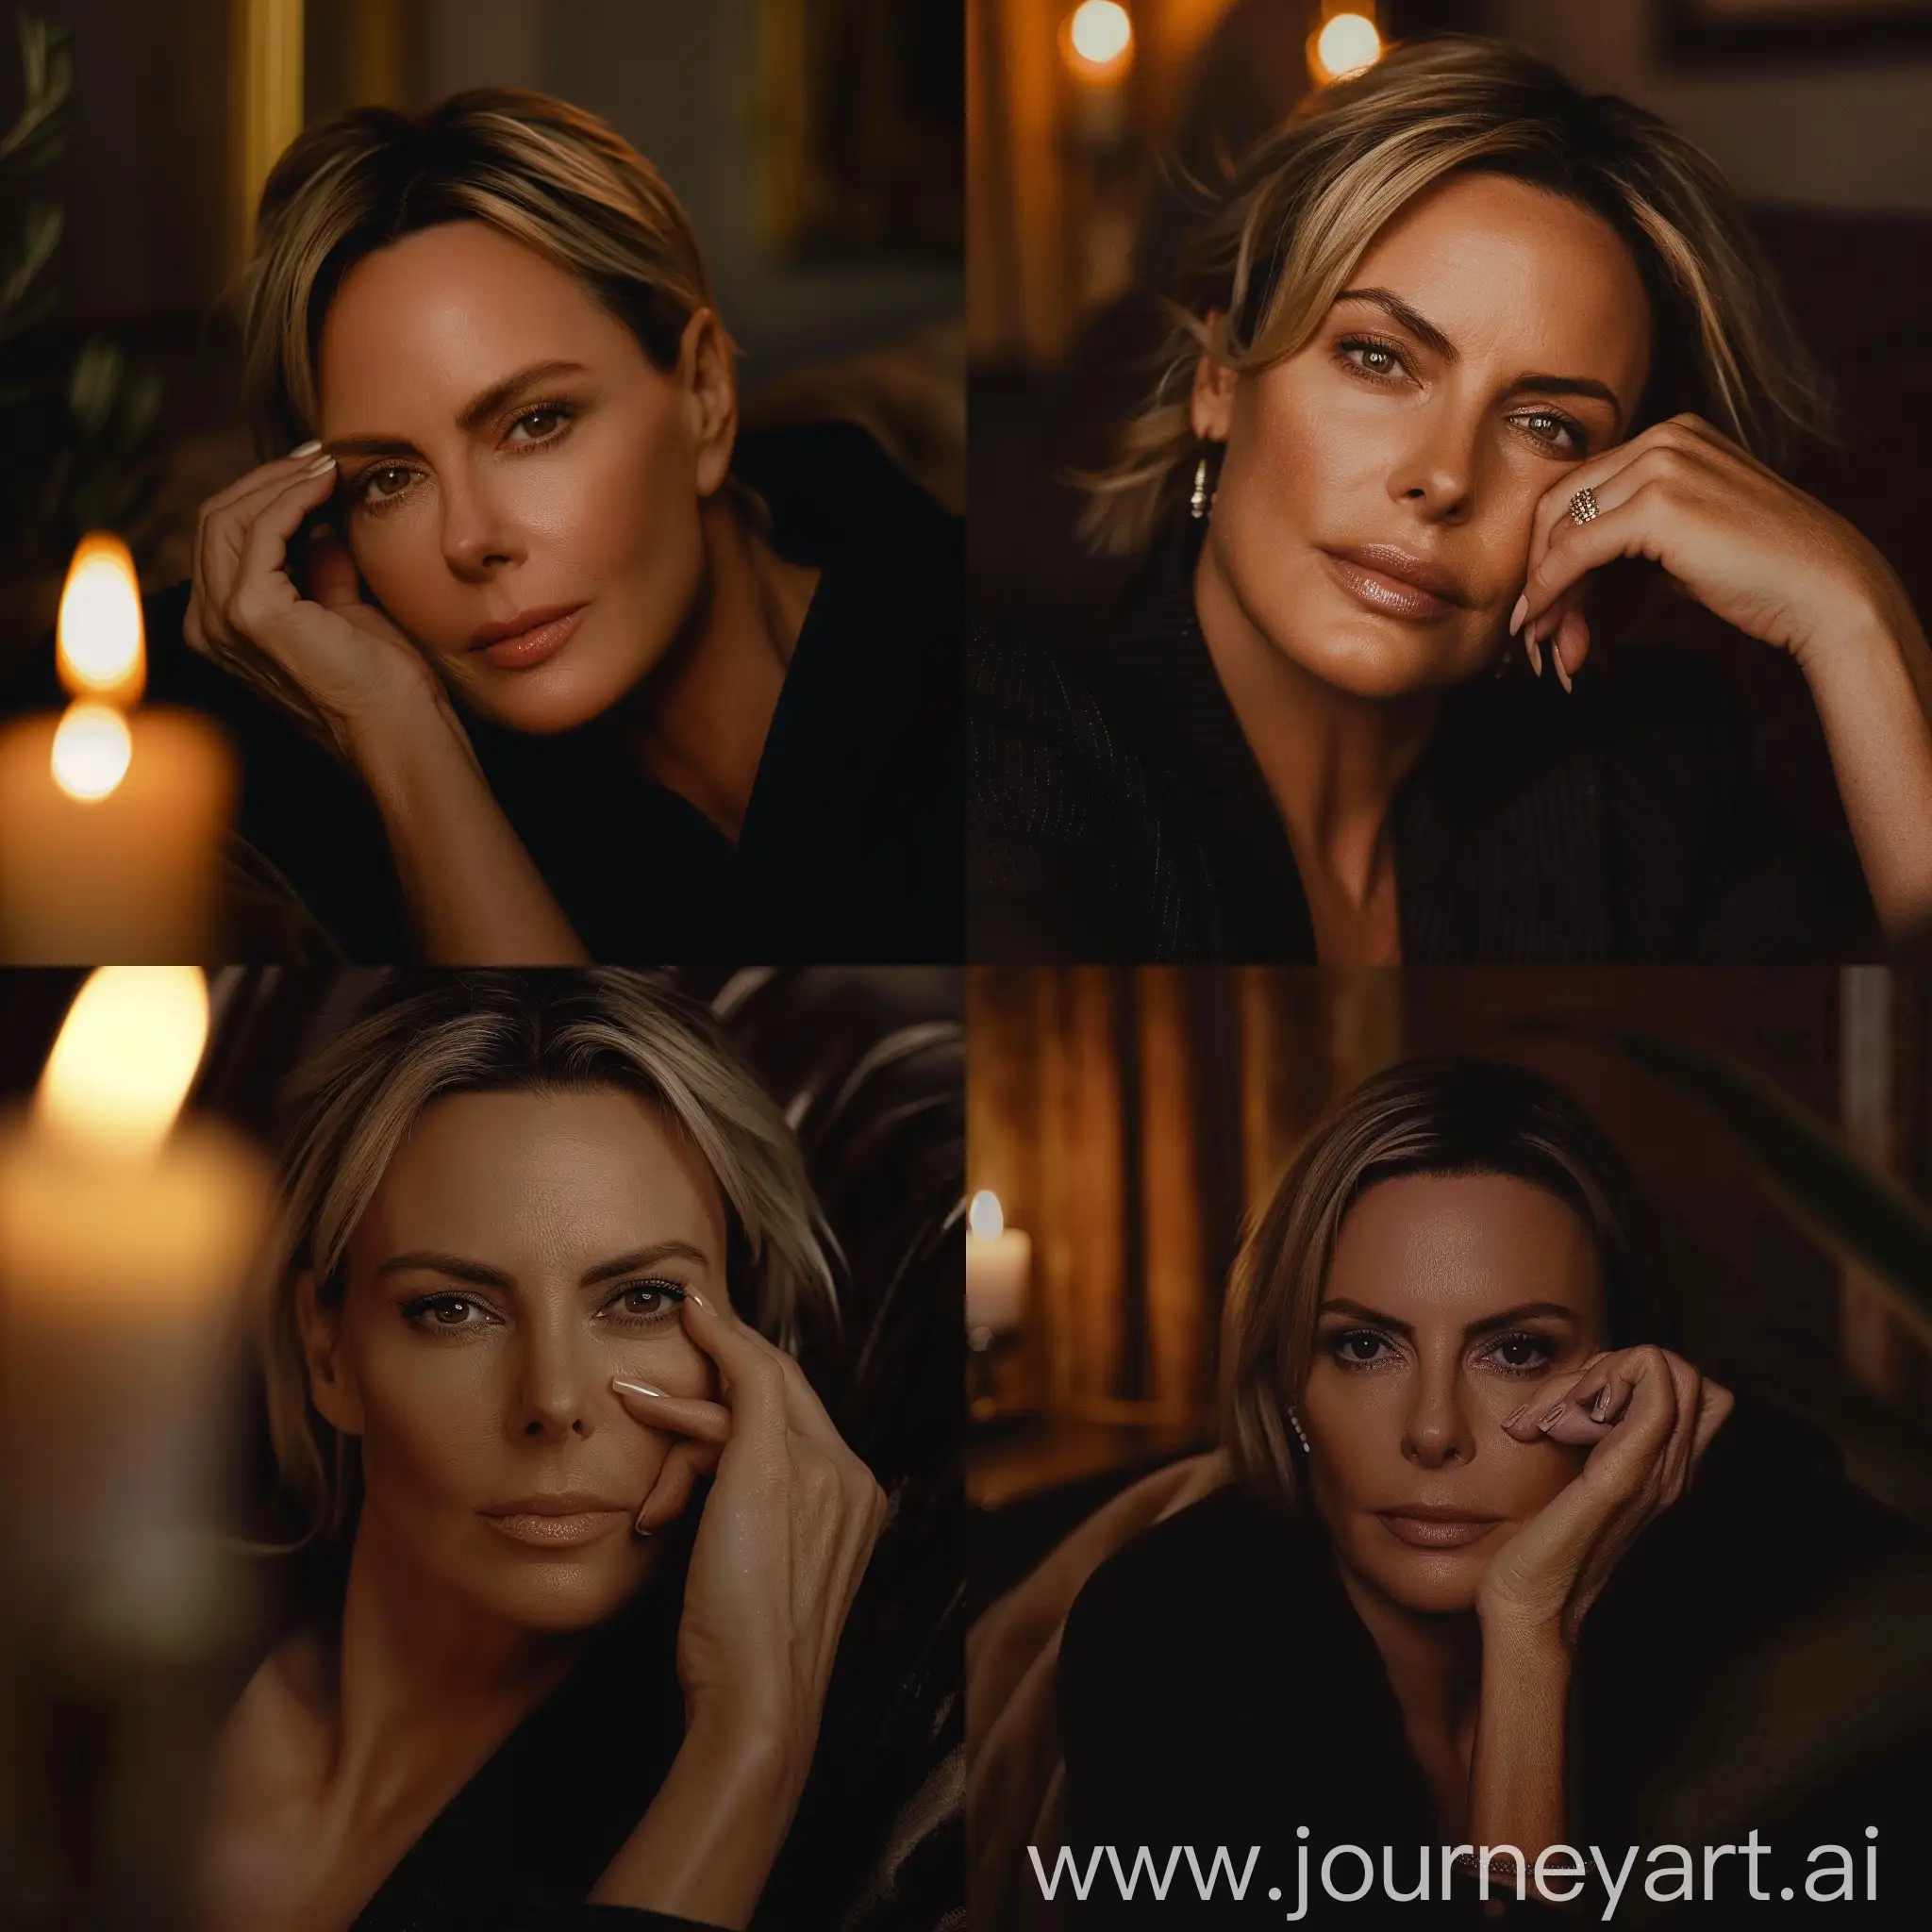 Seductive-Selfie-Charlize-Theron-in-Cozy-London-Flat-by-Candlelight